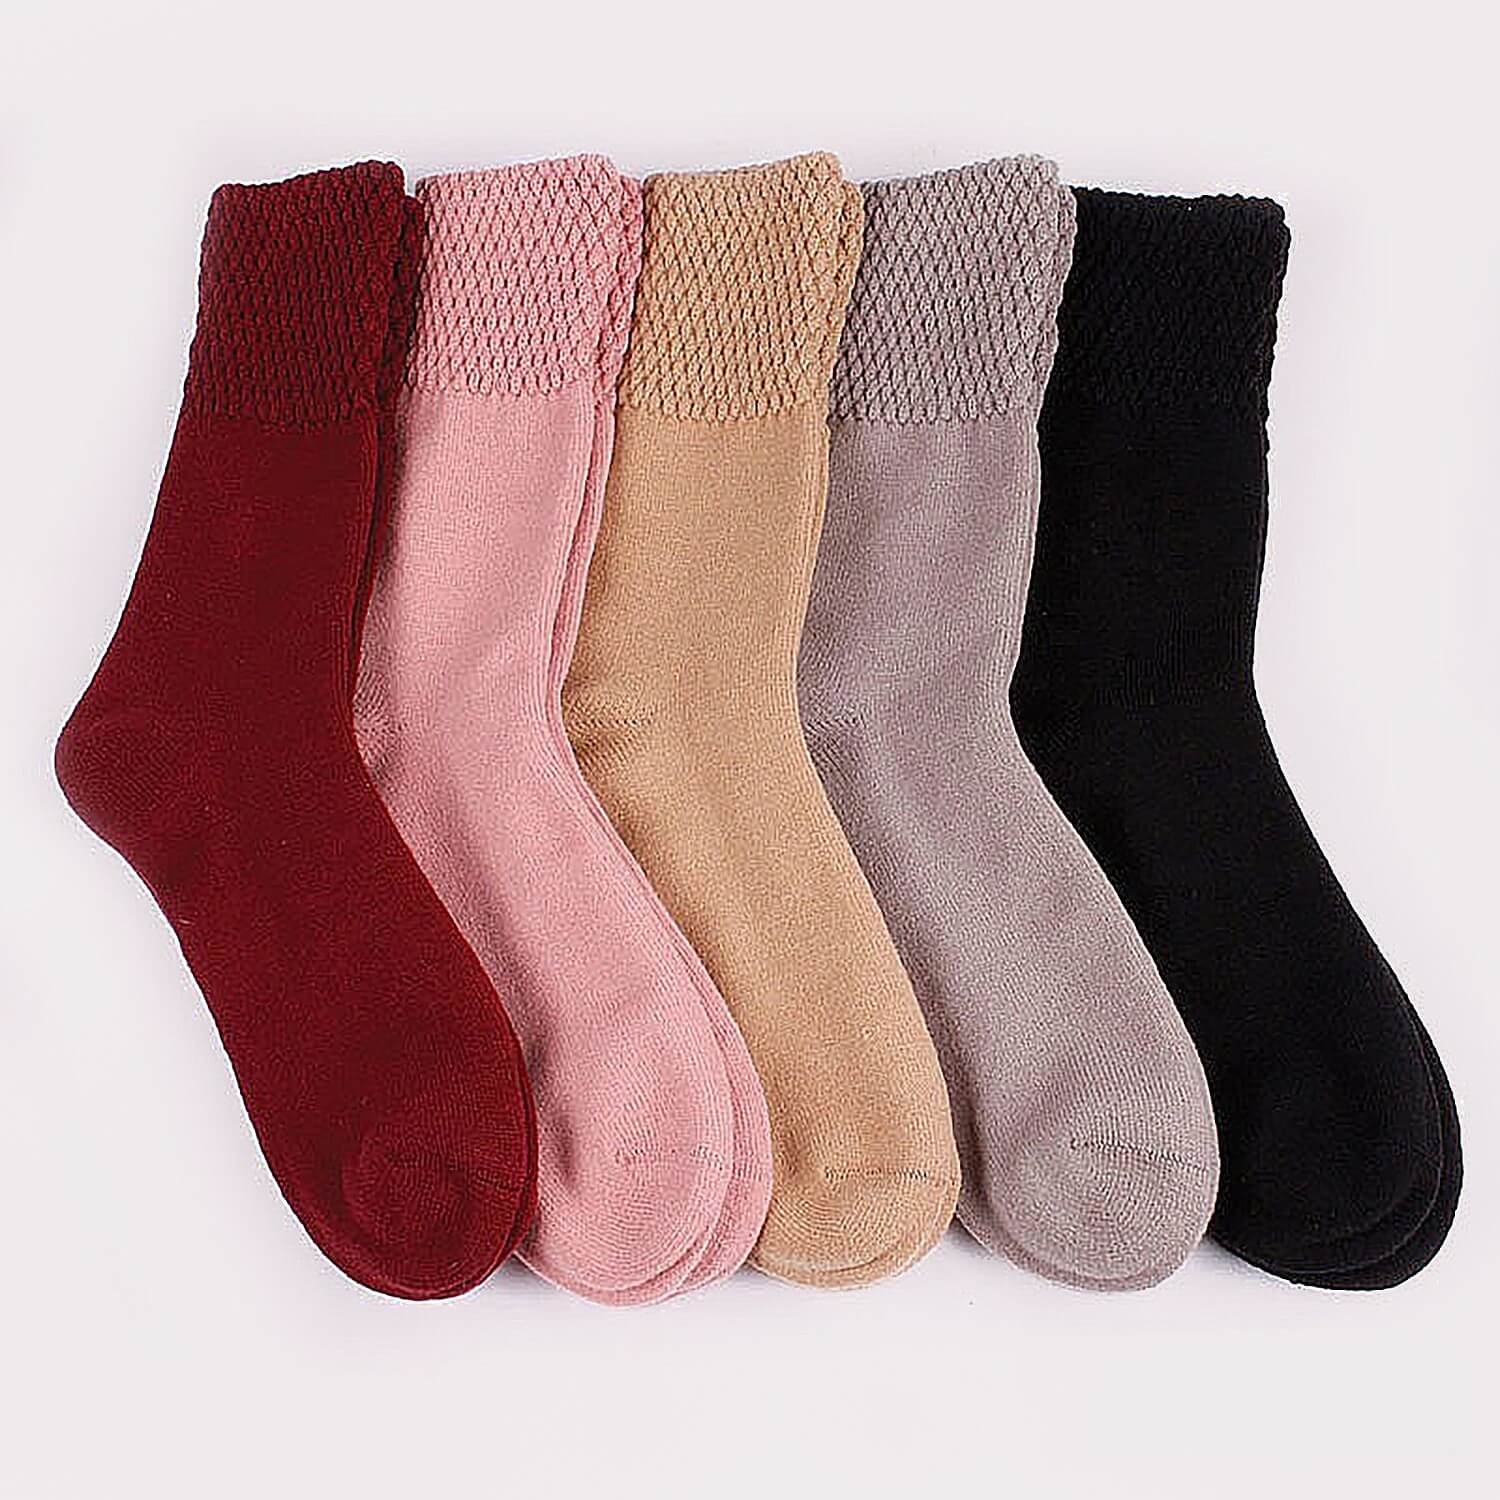 Double-Knit Thermal Socks. Designed to be worn all day.